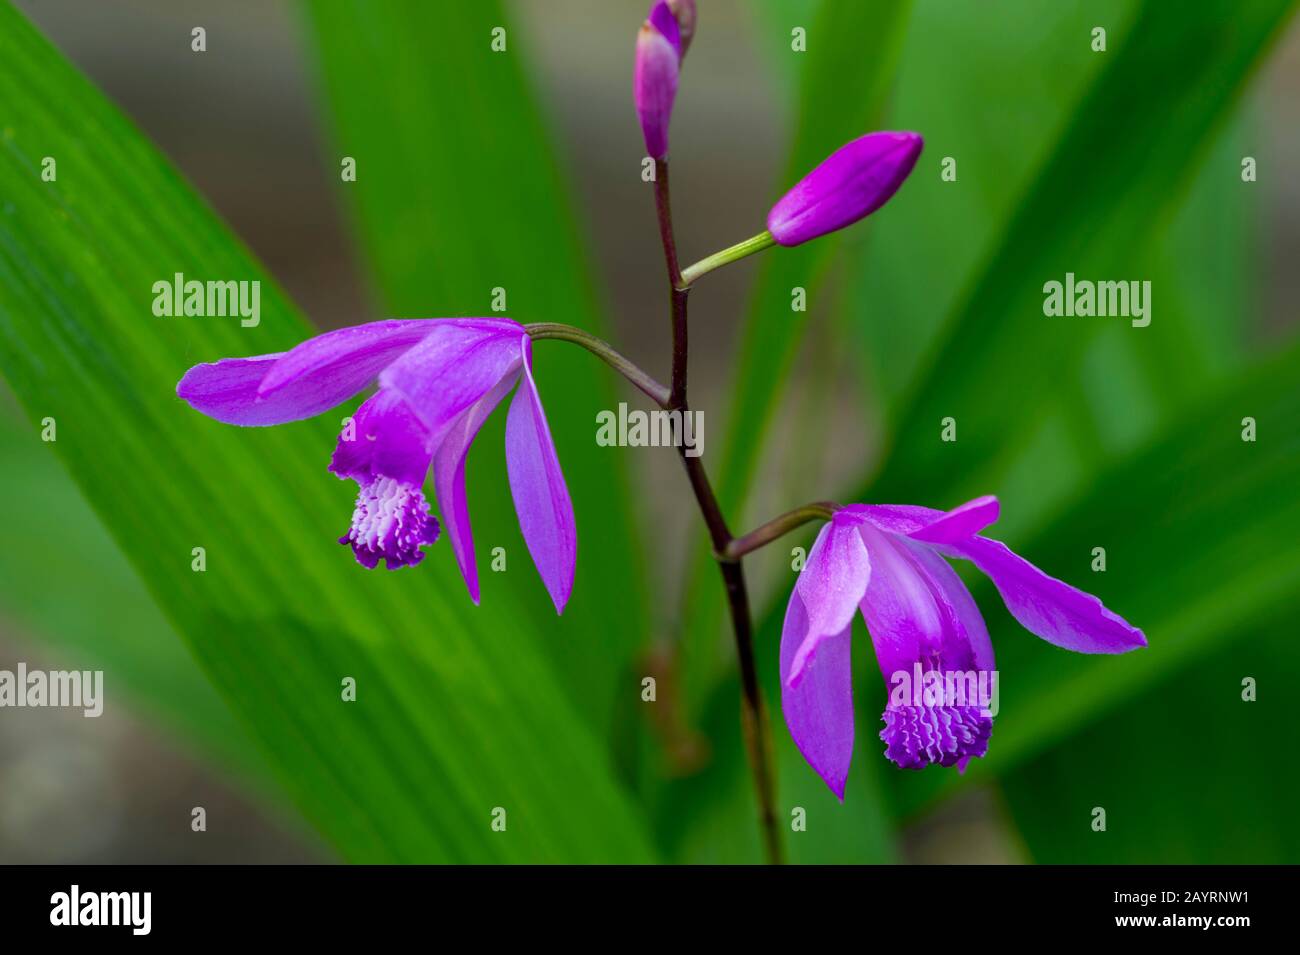 An urn orchid (Bletilla striata) original from China flowering in May in a Kirkland garden in Washington State, USA. Stock Photo